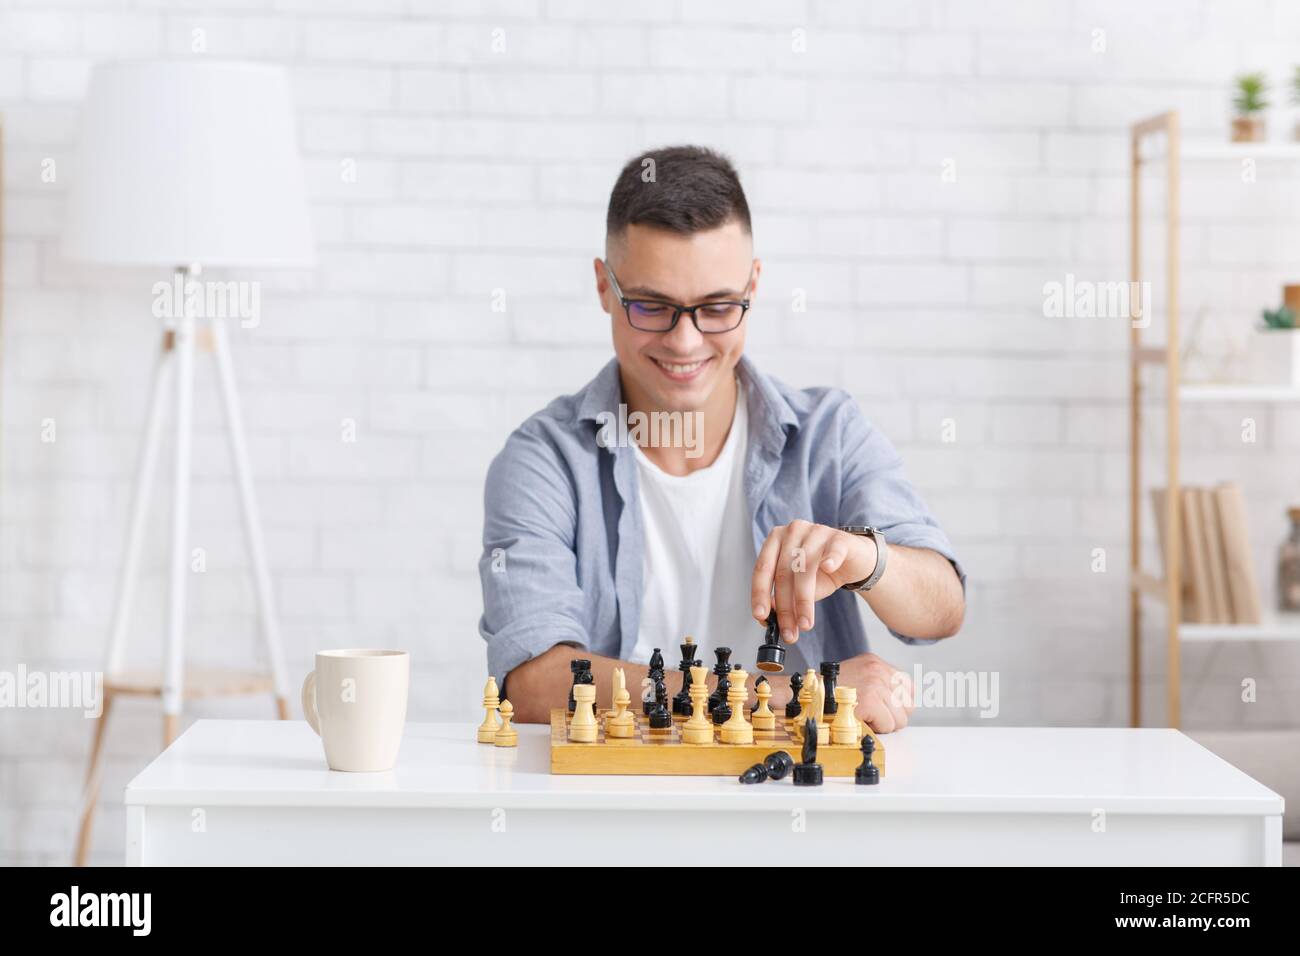 Human Chess Player Against Computer Stock Photo - Image of computer, game:  26163726